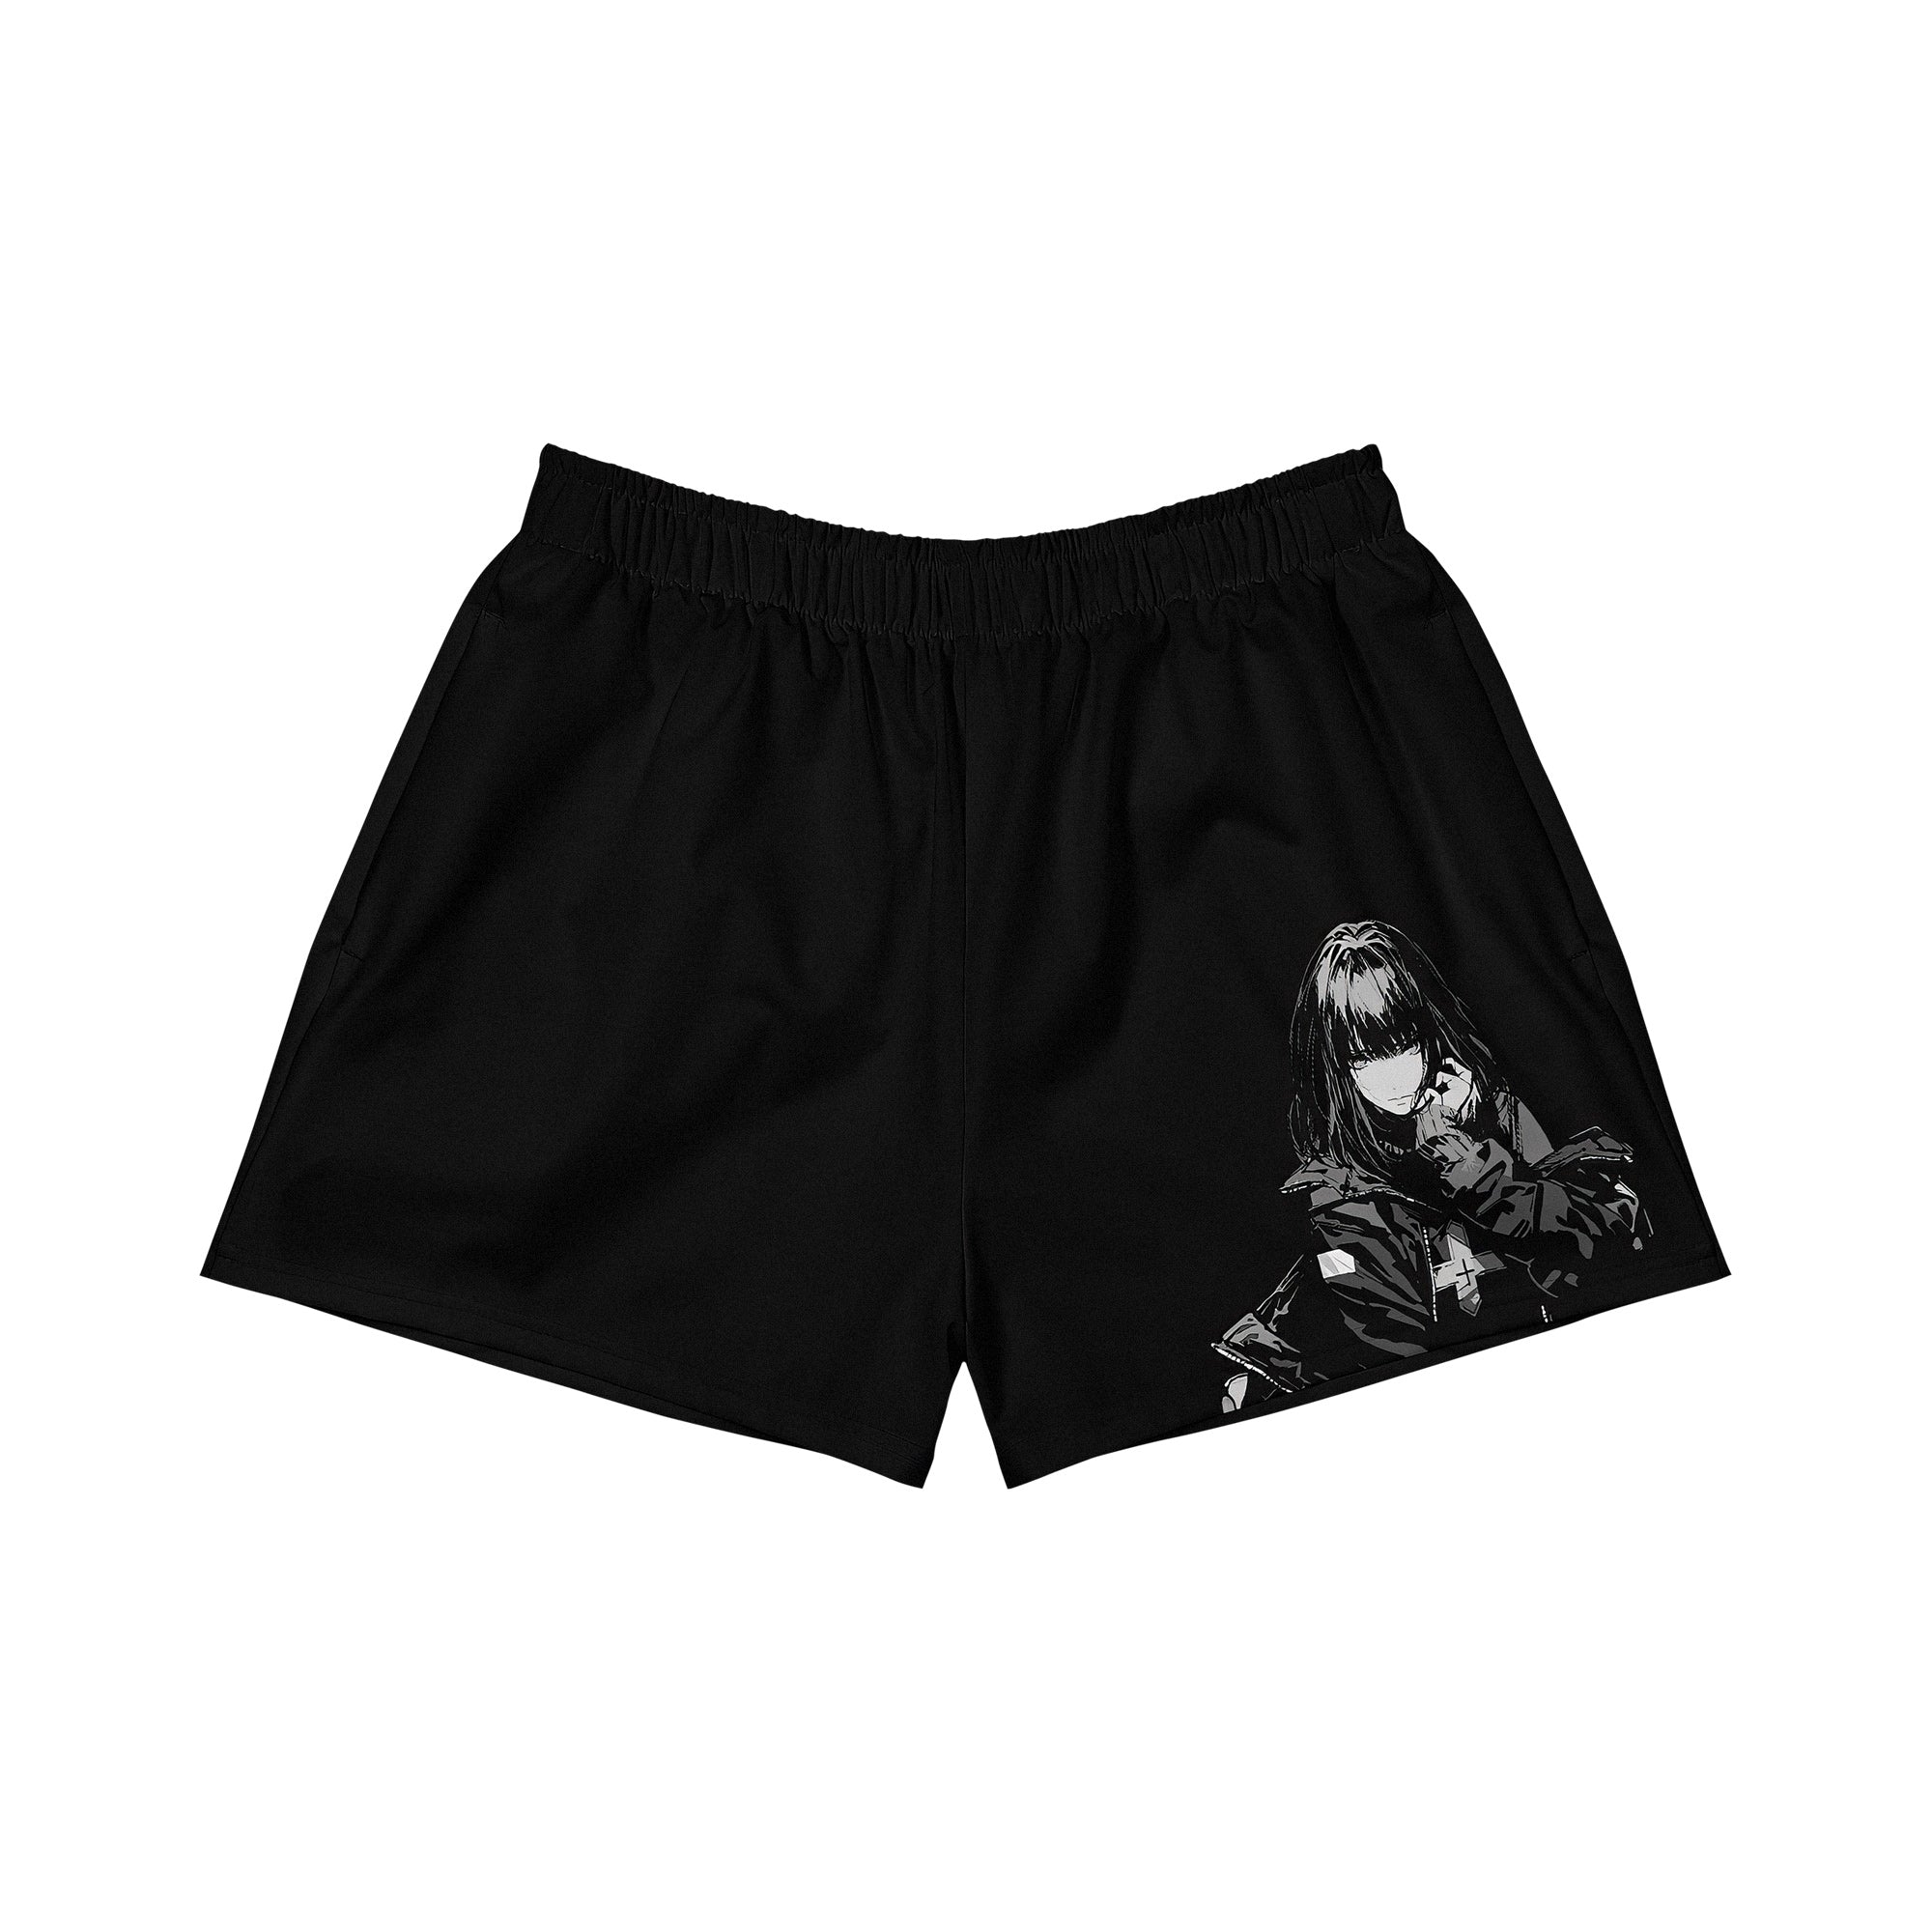 Unisex athletic recycled shorts, the comfortable fit and length make them perfect for running, while the water-repellent quick-dry fabric ensures that they're also great for a quick swim.